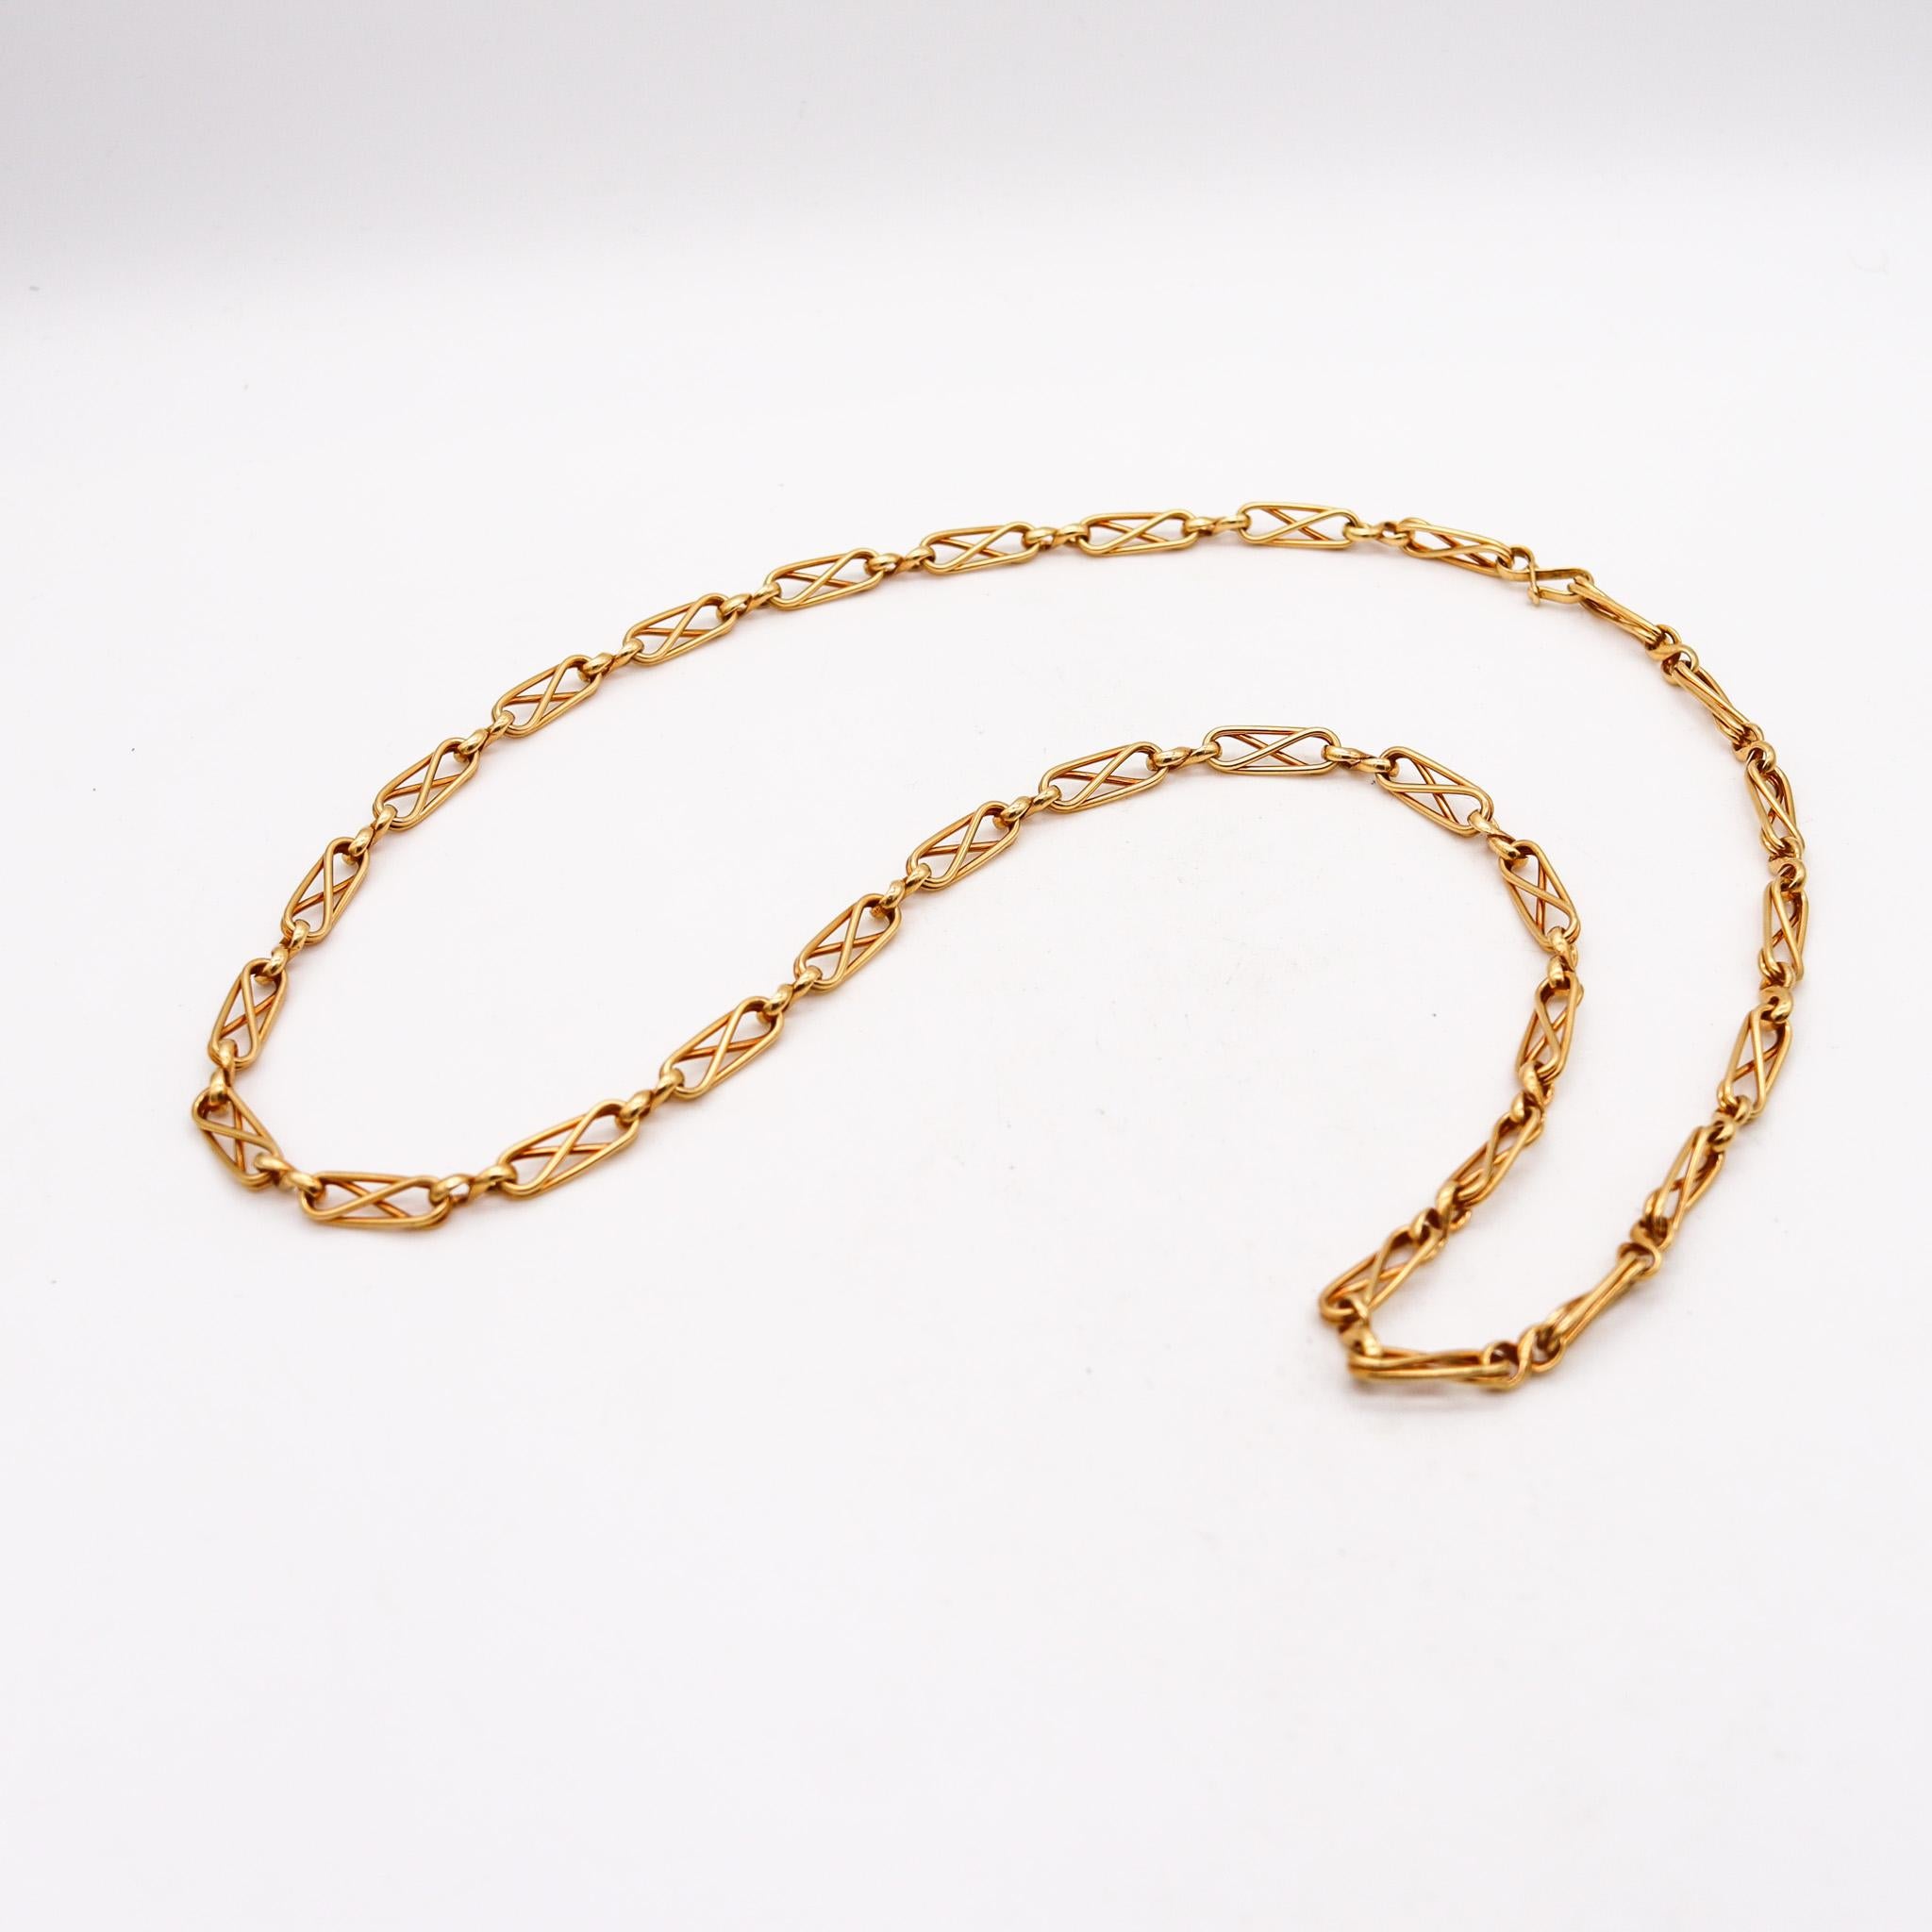 Modernist Cartier Paris 1960 George L'enfant Very Rare Geometric Chain in 18Kt Yellow Gold